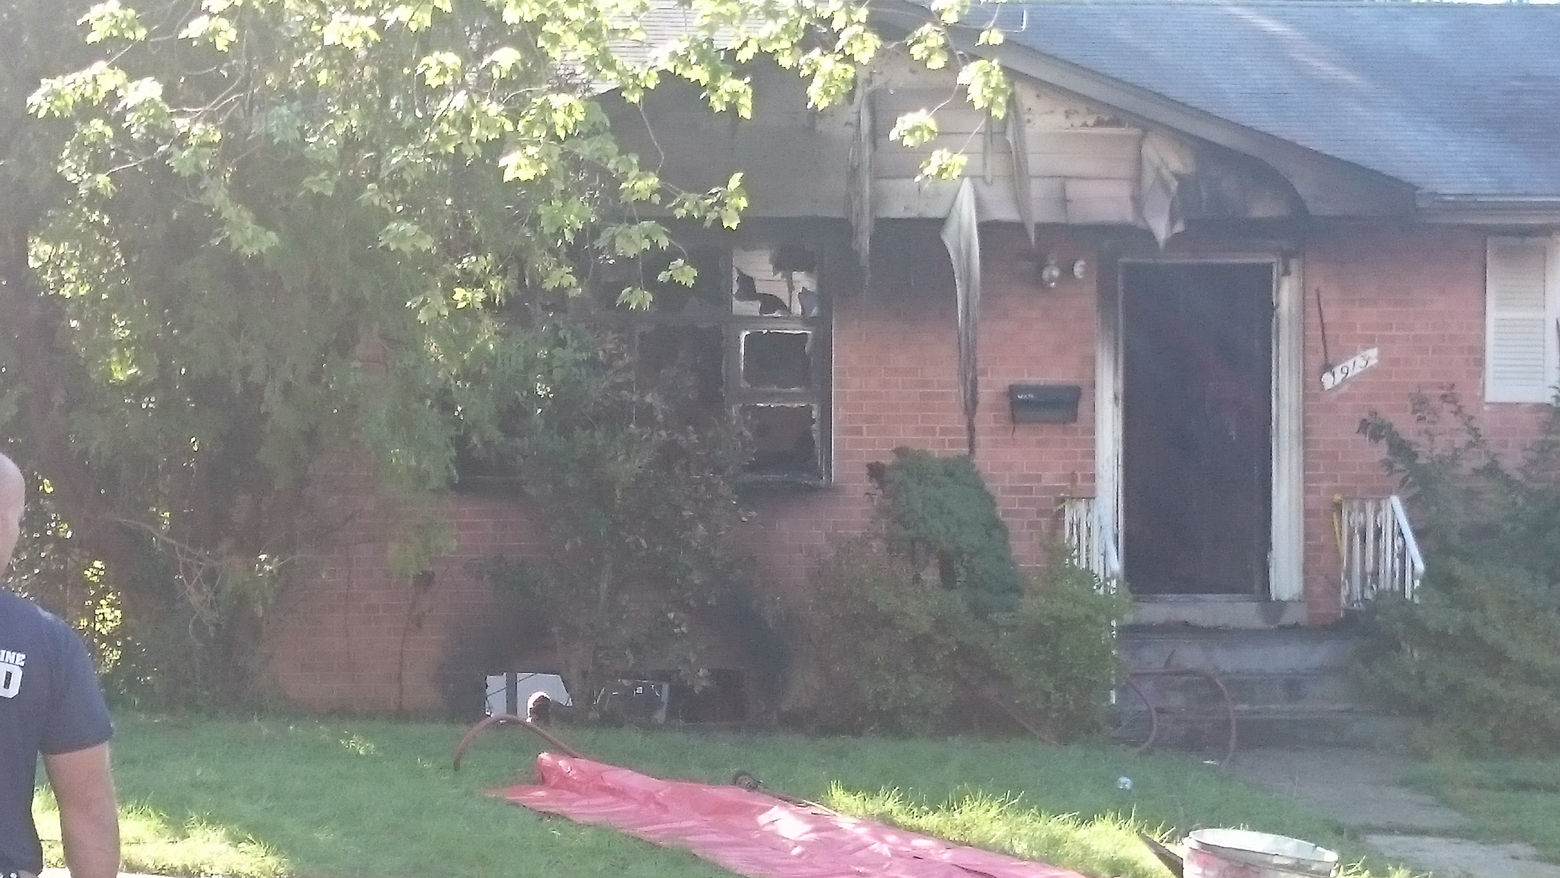 Photo shows a burned out house in Hillcrest Heights